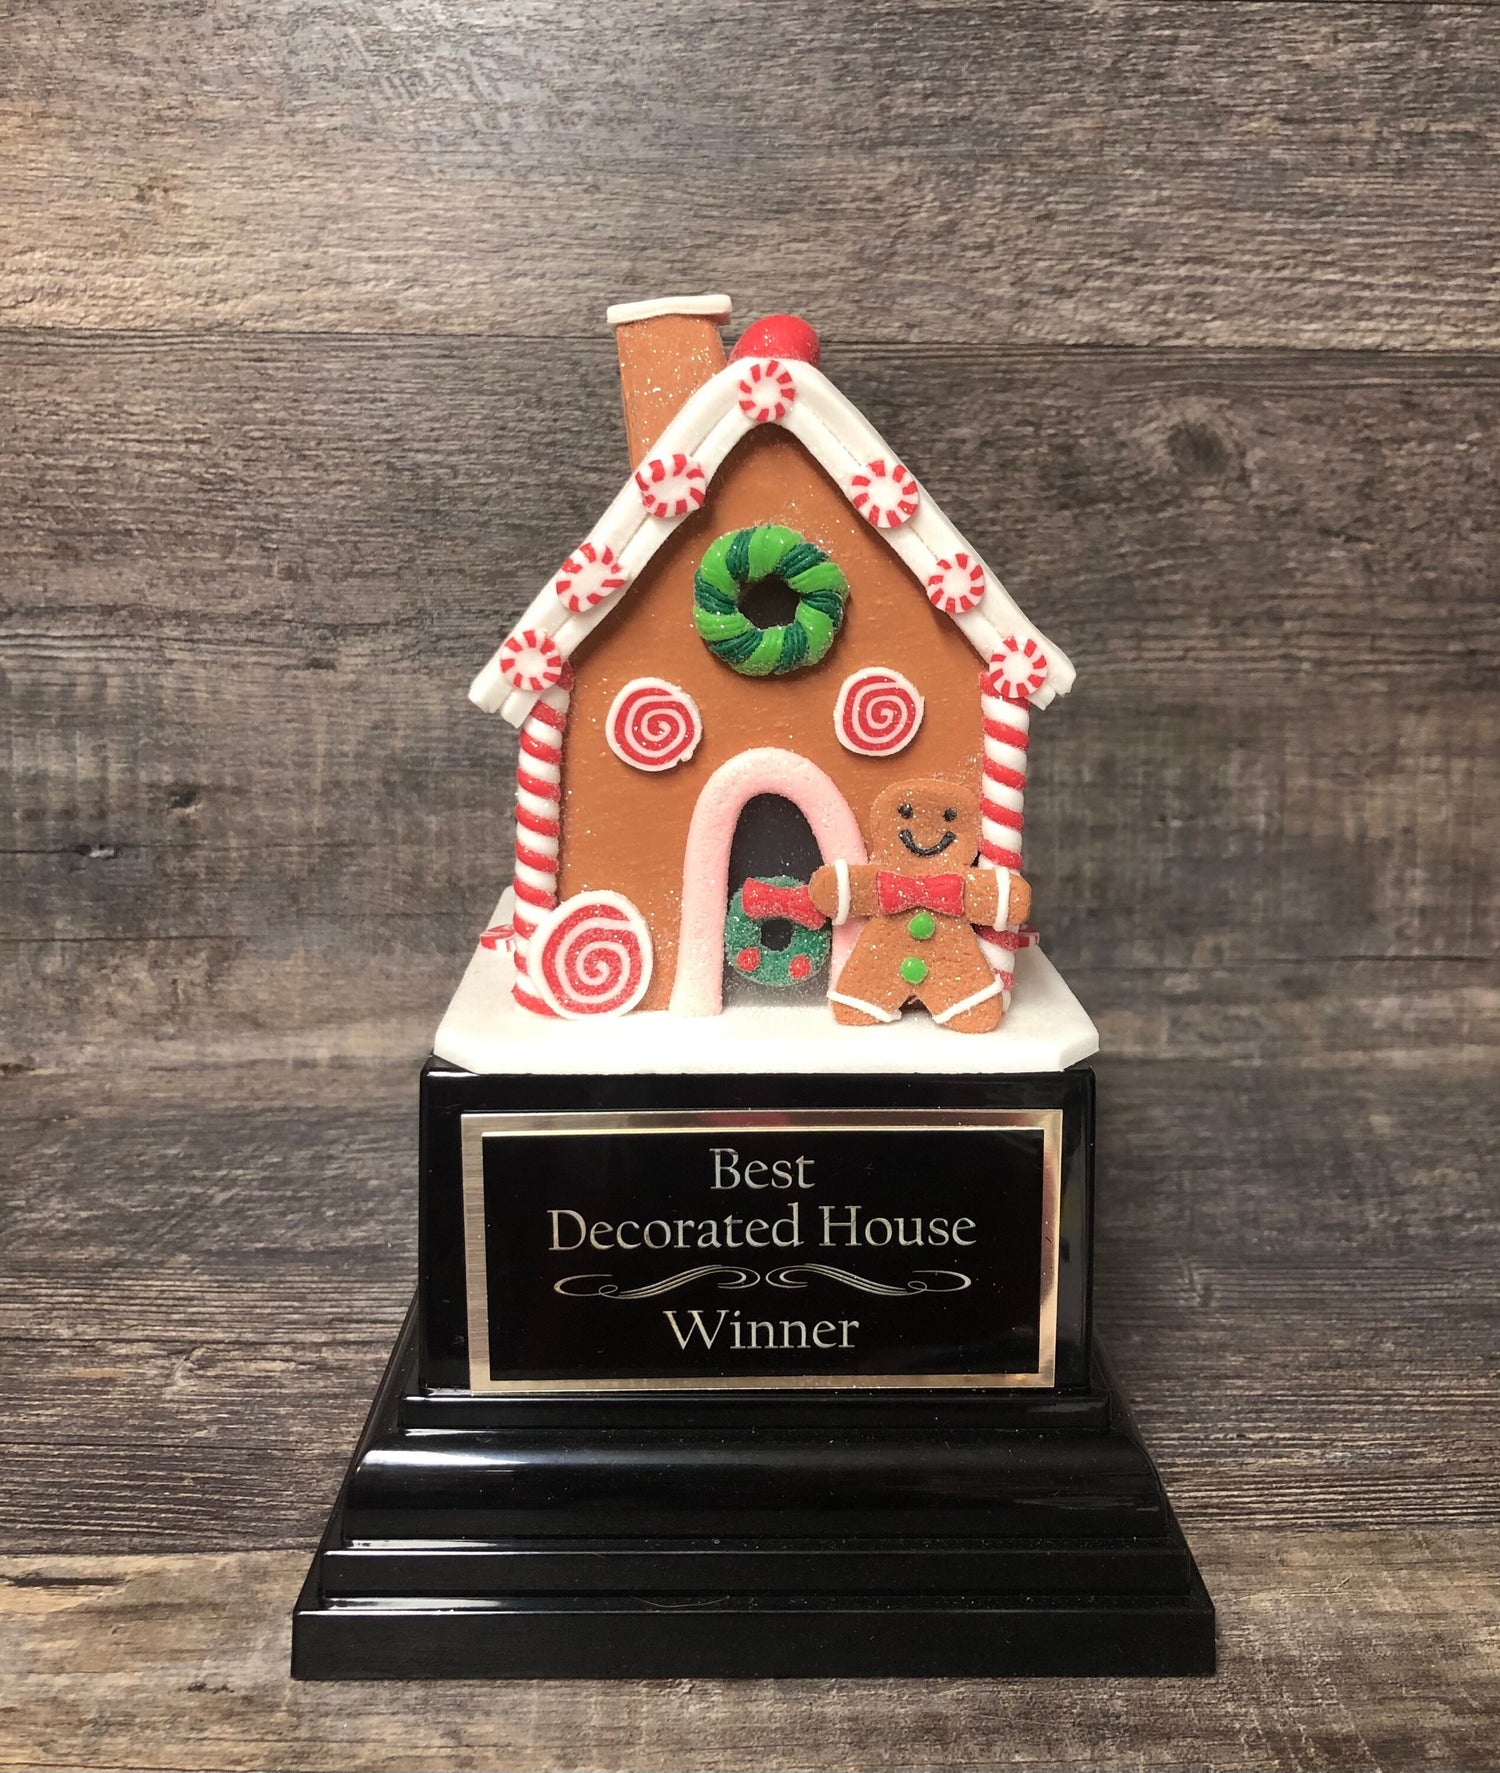 Gingerbread House Cookie Decorating Champion Bake Off Trophy 10" Med Size Ugly Sweater Trophy Christmas Holiday Party Santa Christmas Decor